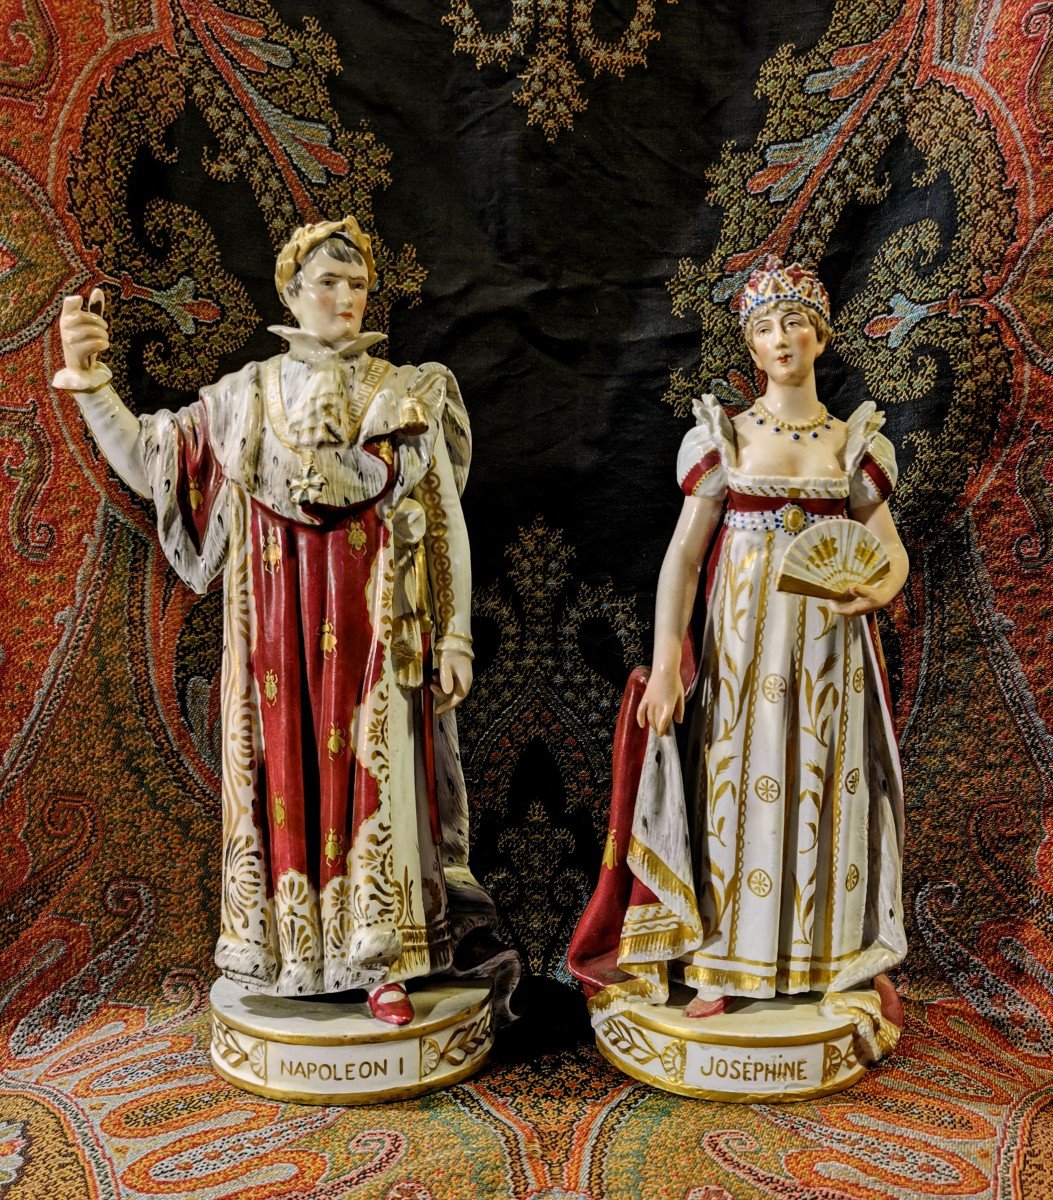 Ceramic Sculpture Of The Emperor, Napoleon And Josephine In Earthenware, French Porcelain